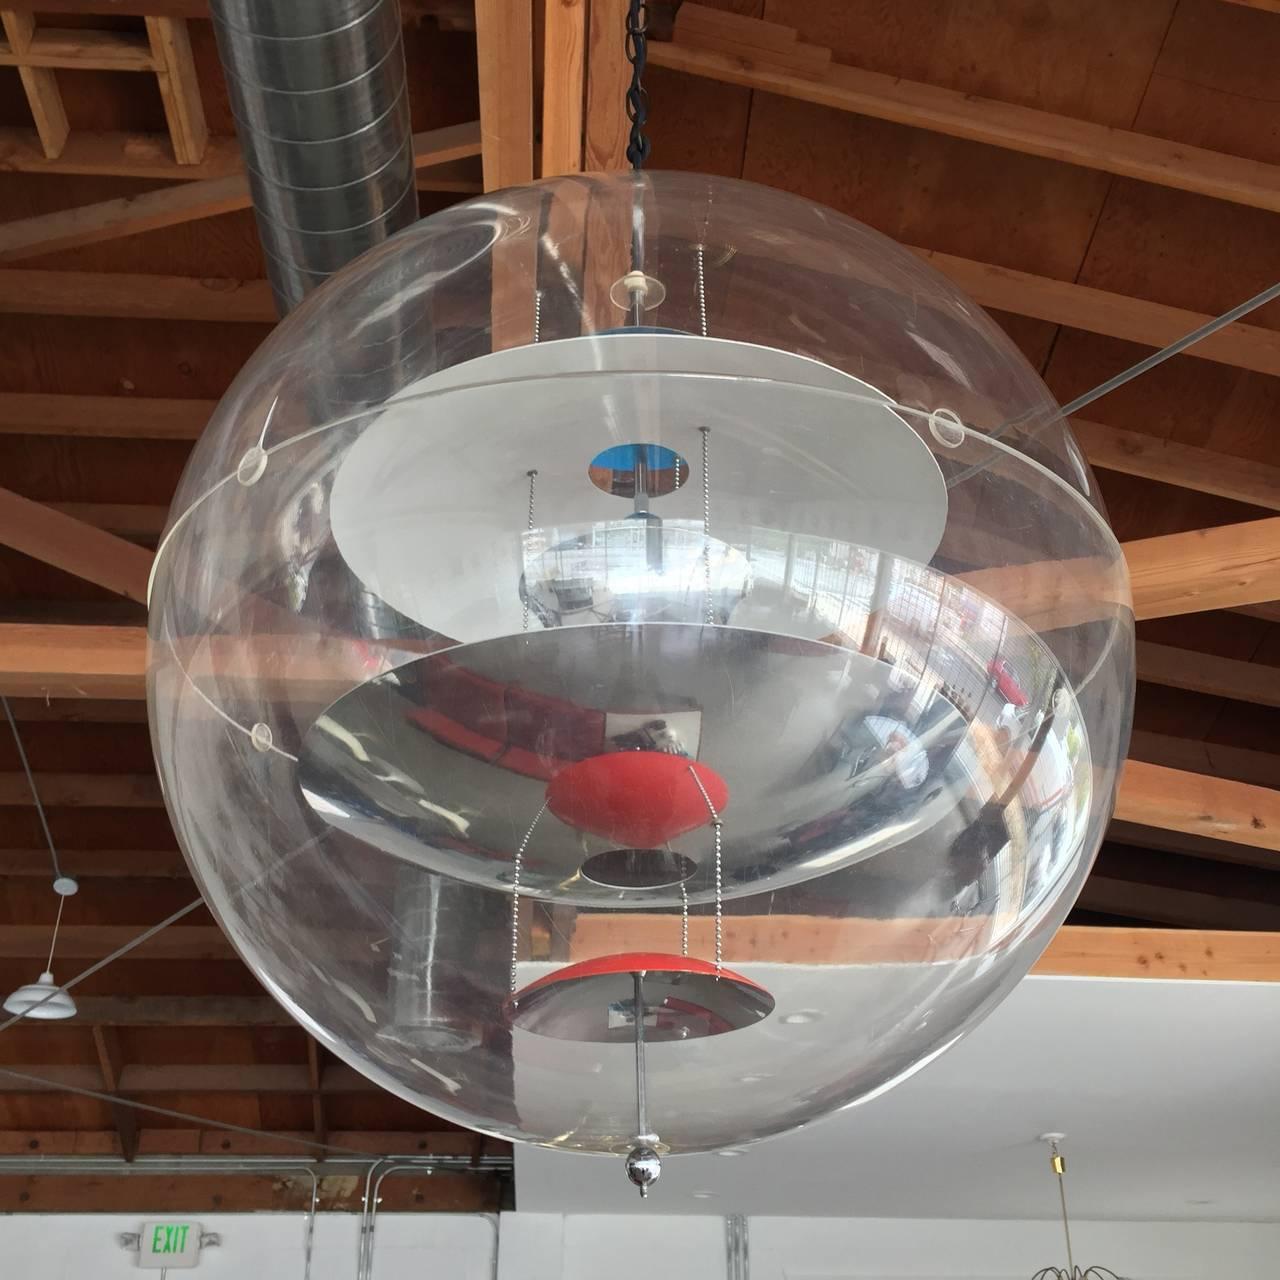 A 1969 original large production of the iconic and inimitable design by Verner Panton for Louis Poulsen. This acrylic globe encompasses five curved reflectors suspended through the center - three chrome, one red, the other blue. With Panton's